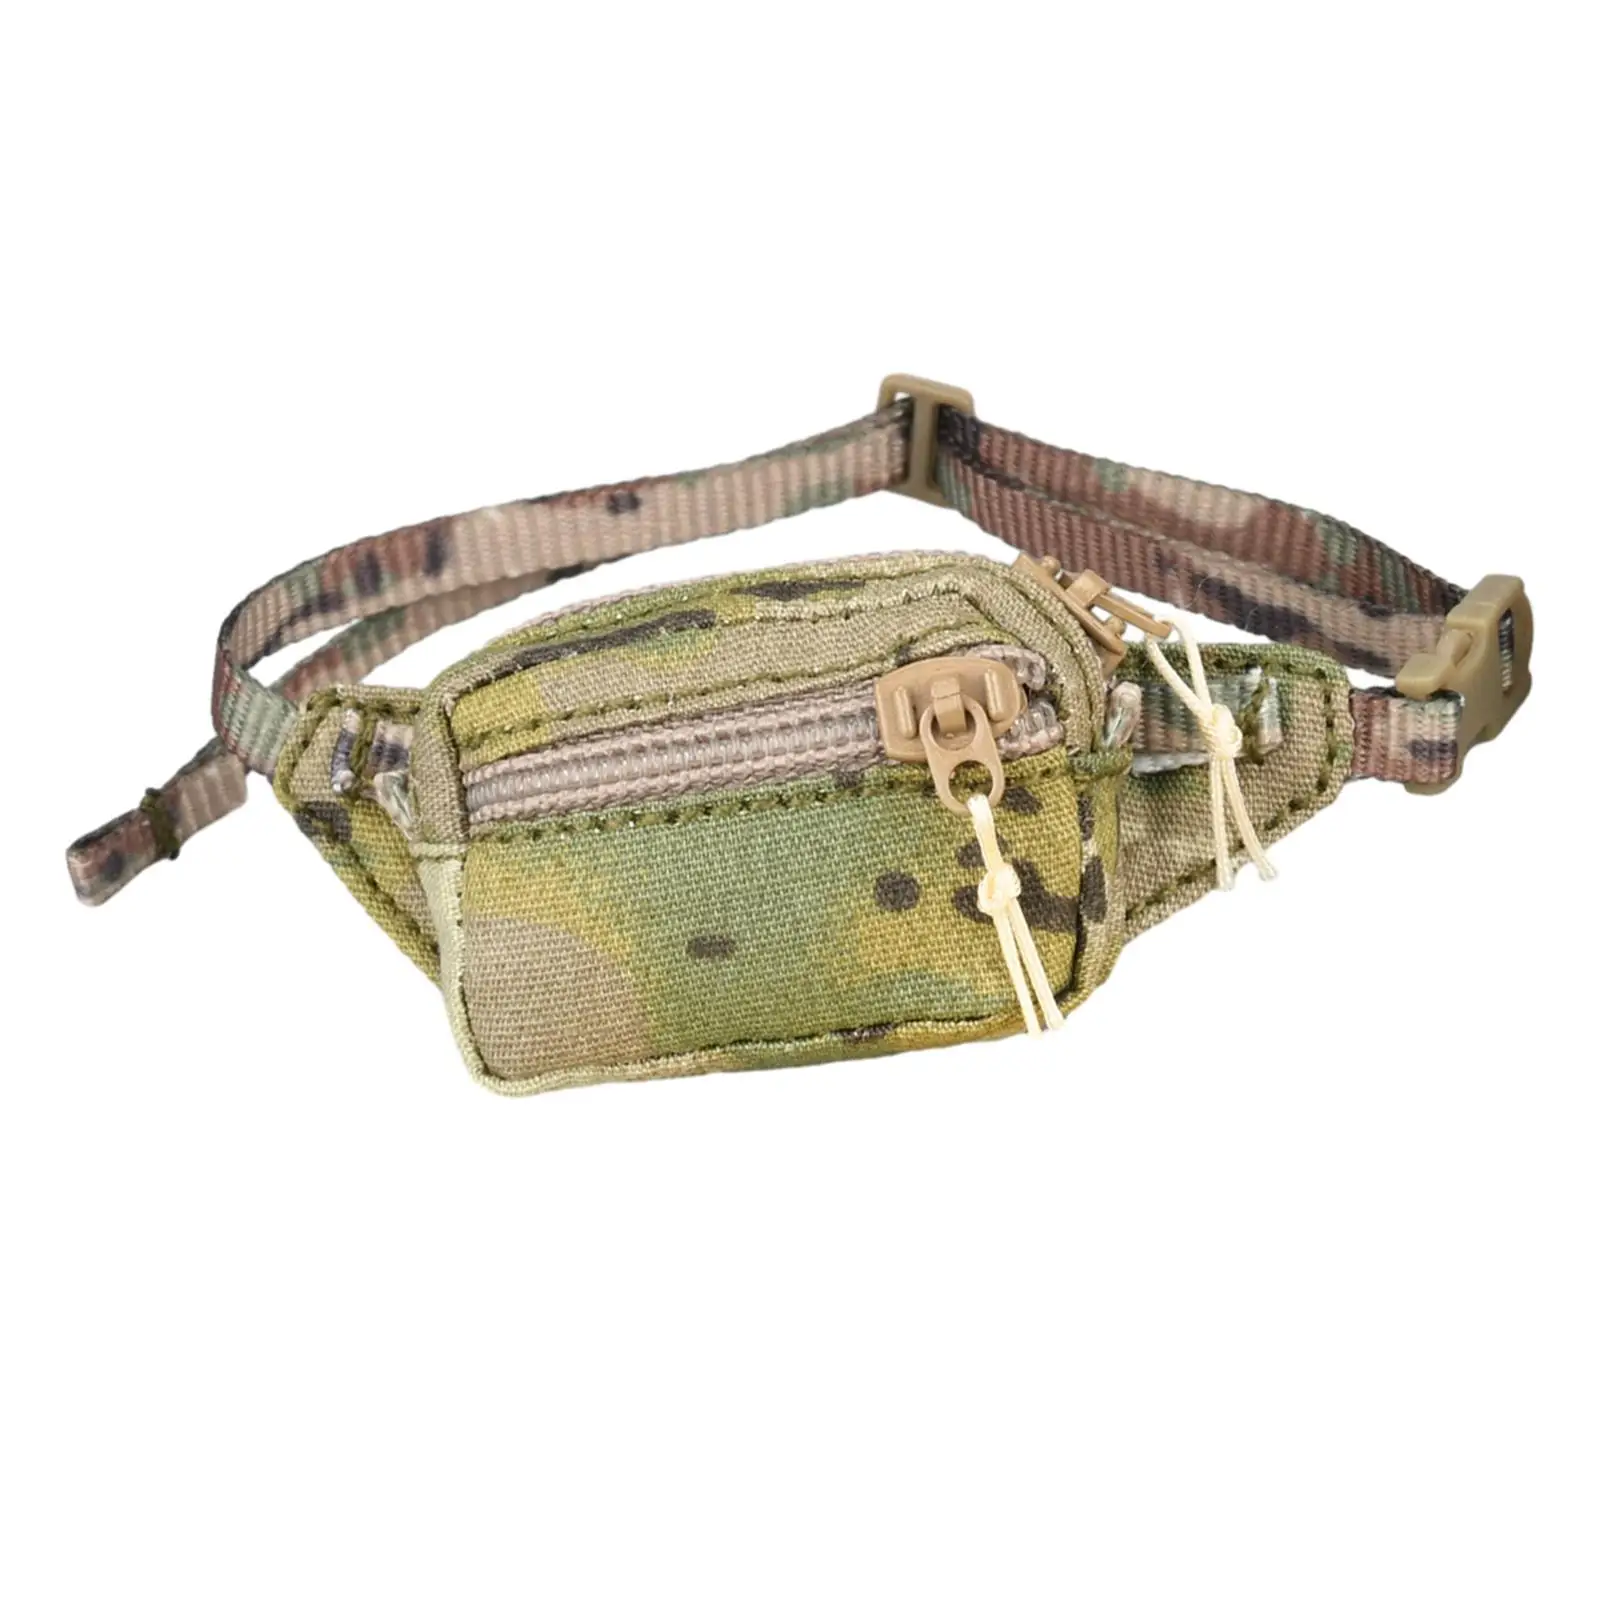 1/6 Scale Soldier Waist Bag\ Classic Waist Storage Bag Decoration Accessory Handmade for 12 inch Male Action Figures Accessory